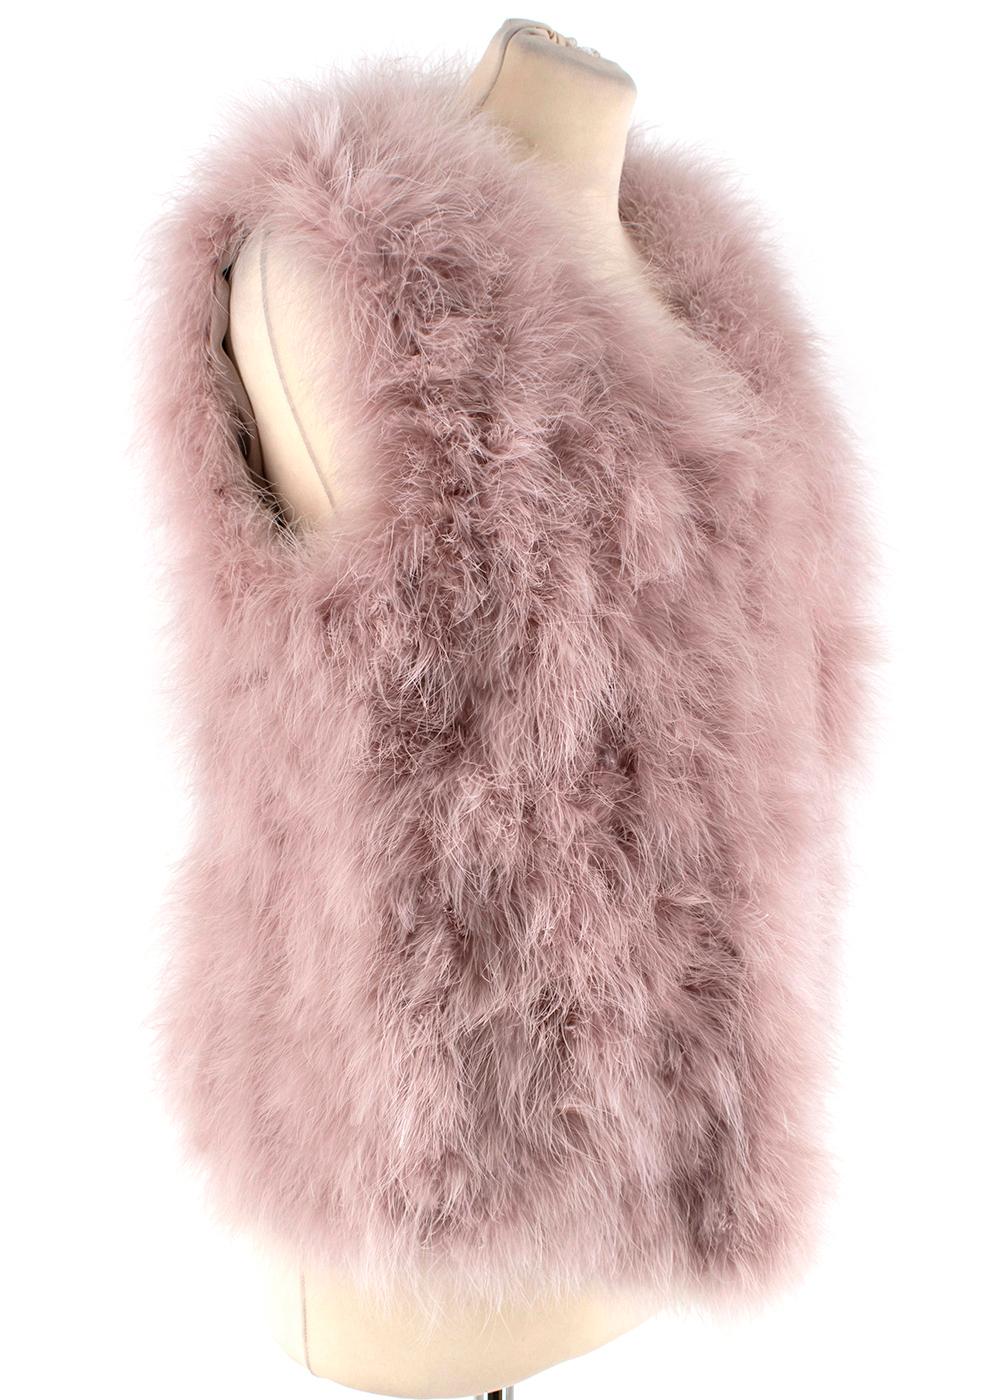 Marc Cain Pink Feathers Gillet

-Luxurious soft feather texture 
-Gorgeous pink hue 
-Classic elegant style 
-Luxurious silk lining 
-Hook Fastening to the front 
-Timeless piece, perfect for some winter street style 

Materials:
100% feathers